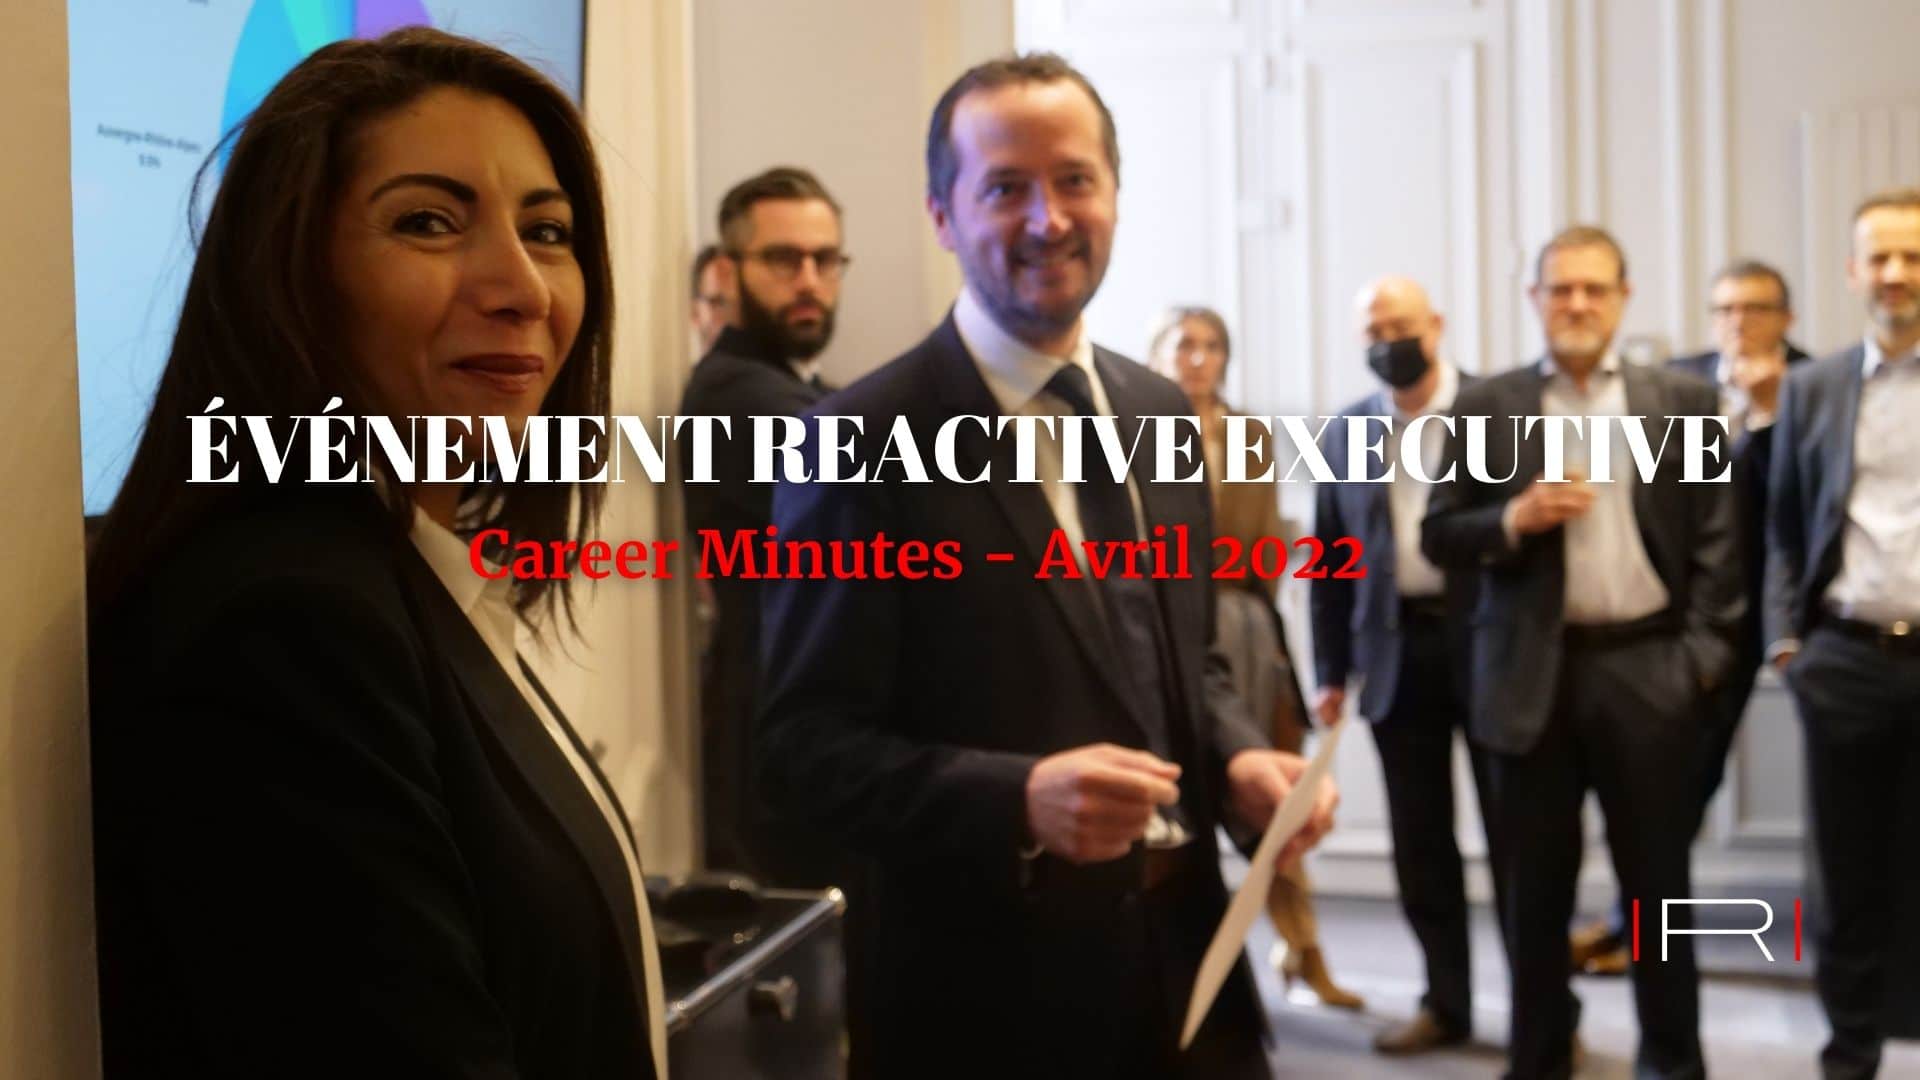 – APRIL 2022 MANAGERS EVENT –